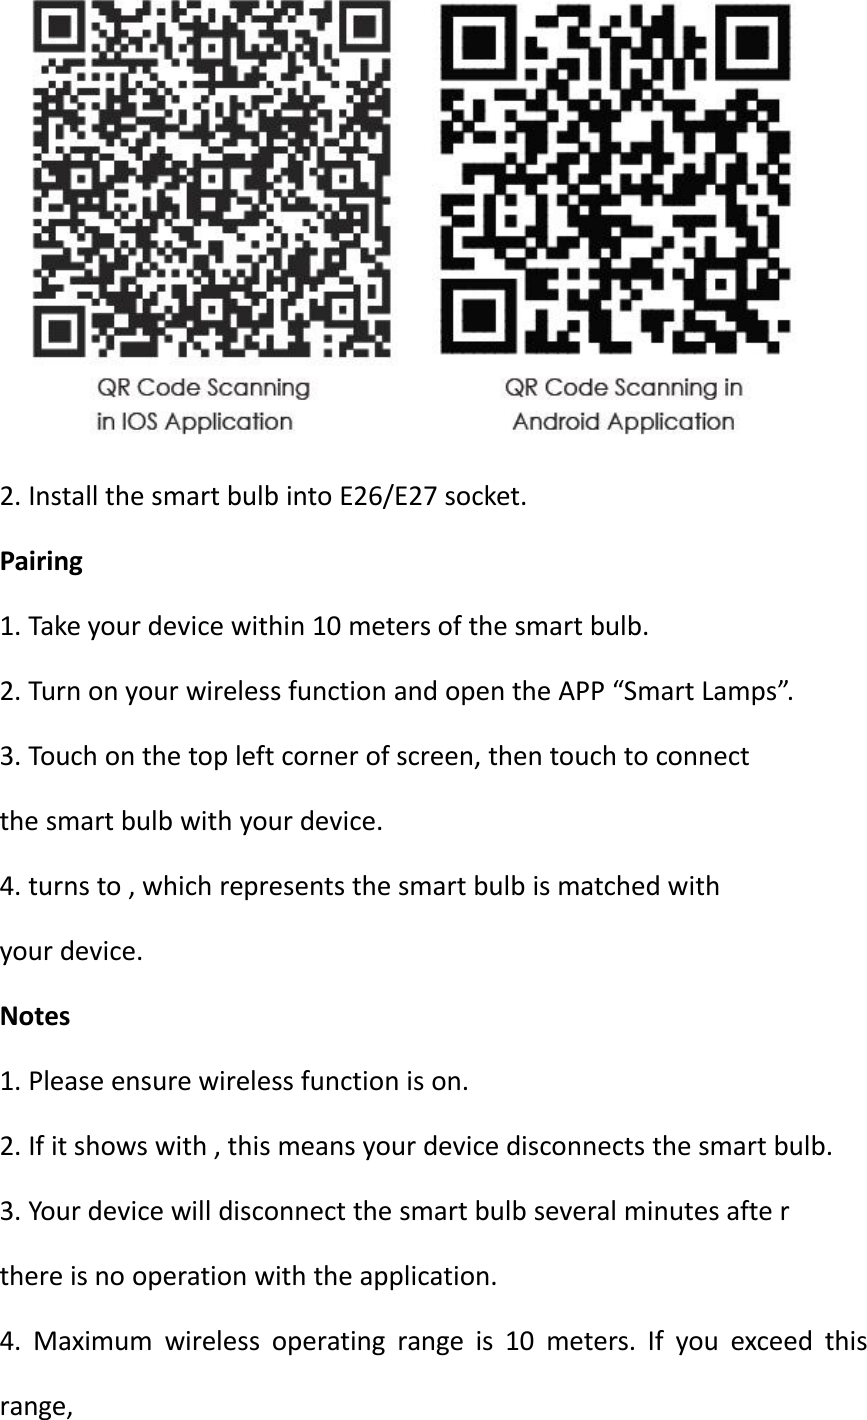 2. Install the smart bulb into E26/E27 socket.Pairing1. Take your device within 10 meters of the smart bulb.2. Turn on your wireless function and open the APP “Smart Lamps”.3. Touch on the top left corner of screen, then touch to connectthe smart bulb with your device.4. turns to , which represents the smart bulb is matched withyour device.Notes1. Please ensure wireless function is on.2. If it shows with , this means your device disconnects the smart bulb.3. Your device will disconnect the smart bulb several minutes afte rthere is no operation with the application.4. Maximum wireless operating range is 10 meters. If you exceed thisrange,